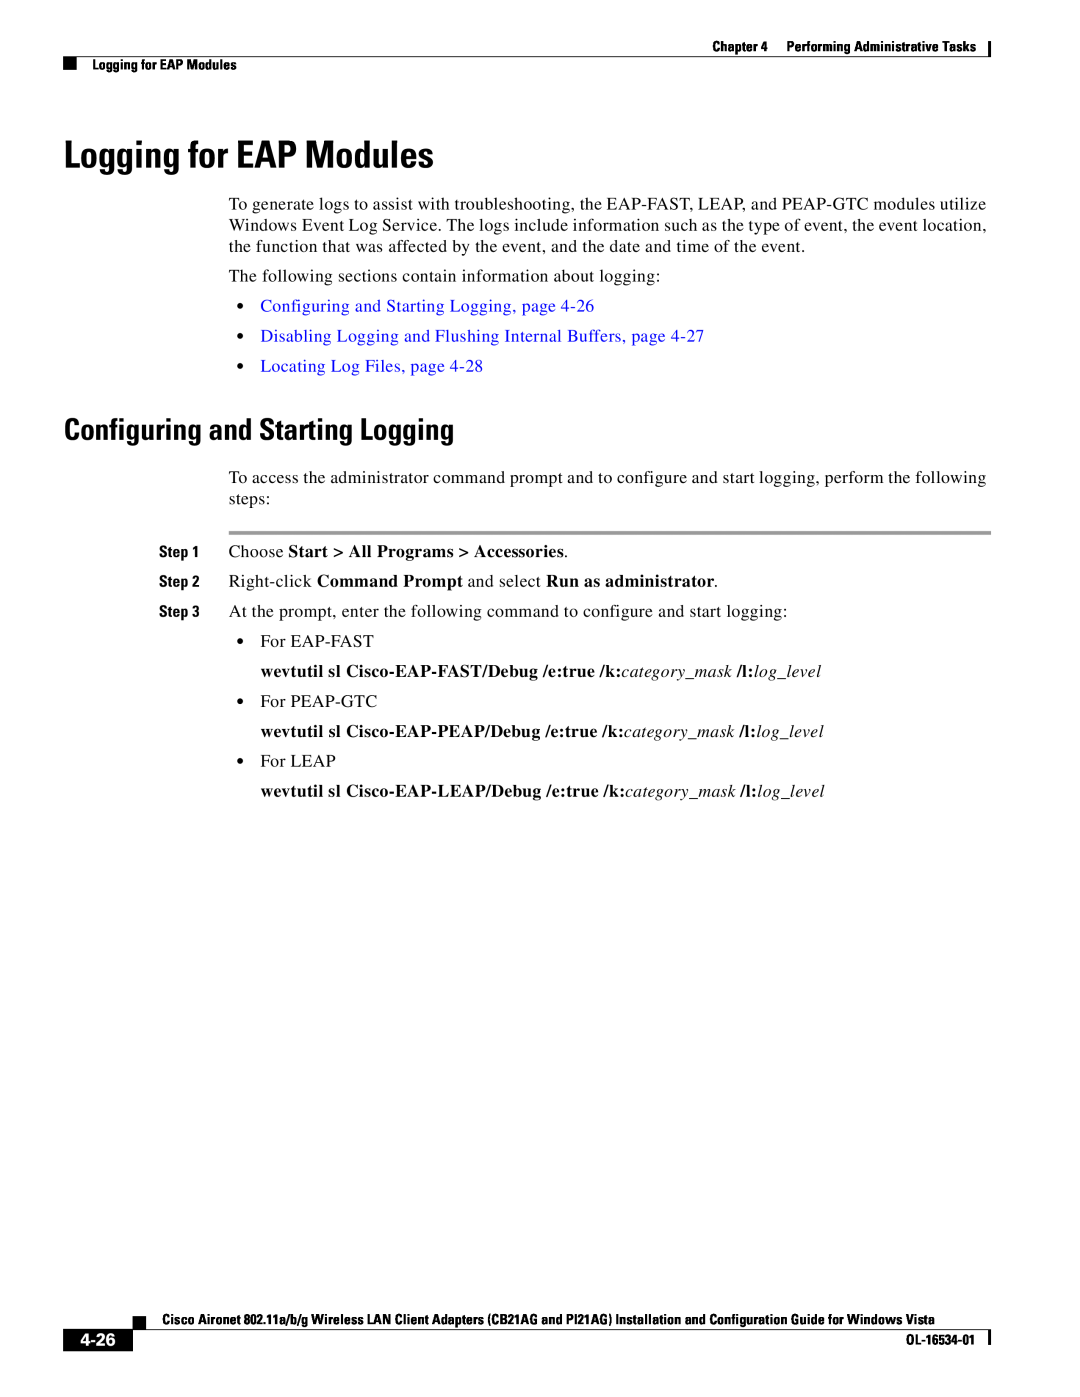 Cisco Systems PI21AG Logging for EAP Modules, Configuring and Starting Logging, page, Locating Log Files, page, 4-26 